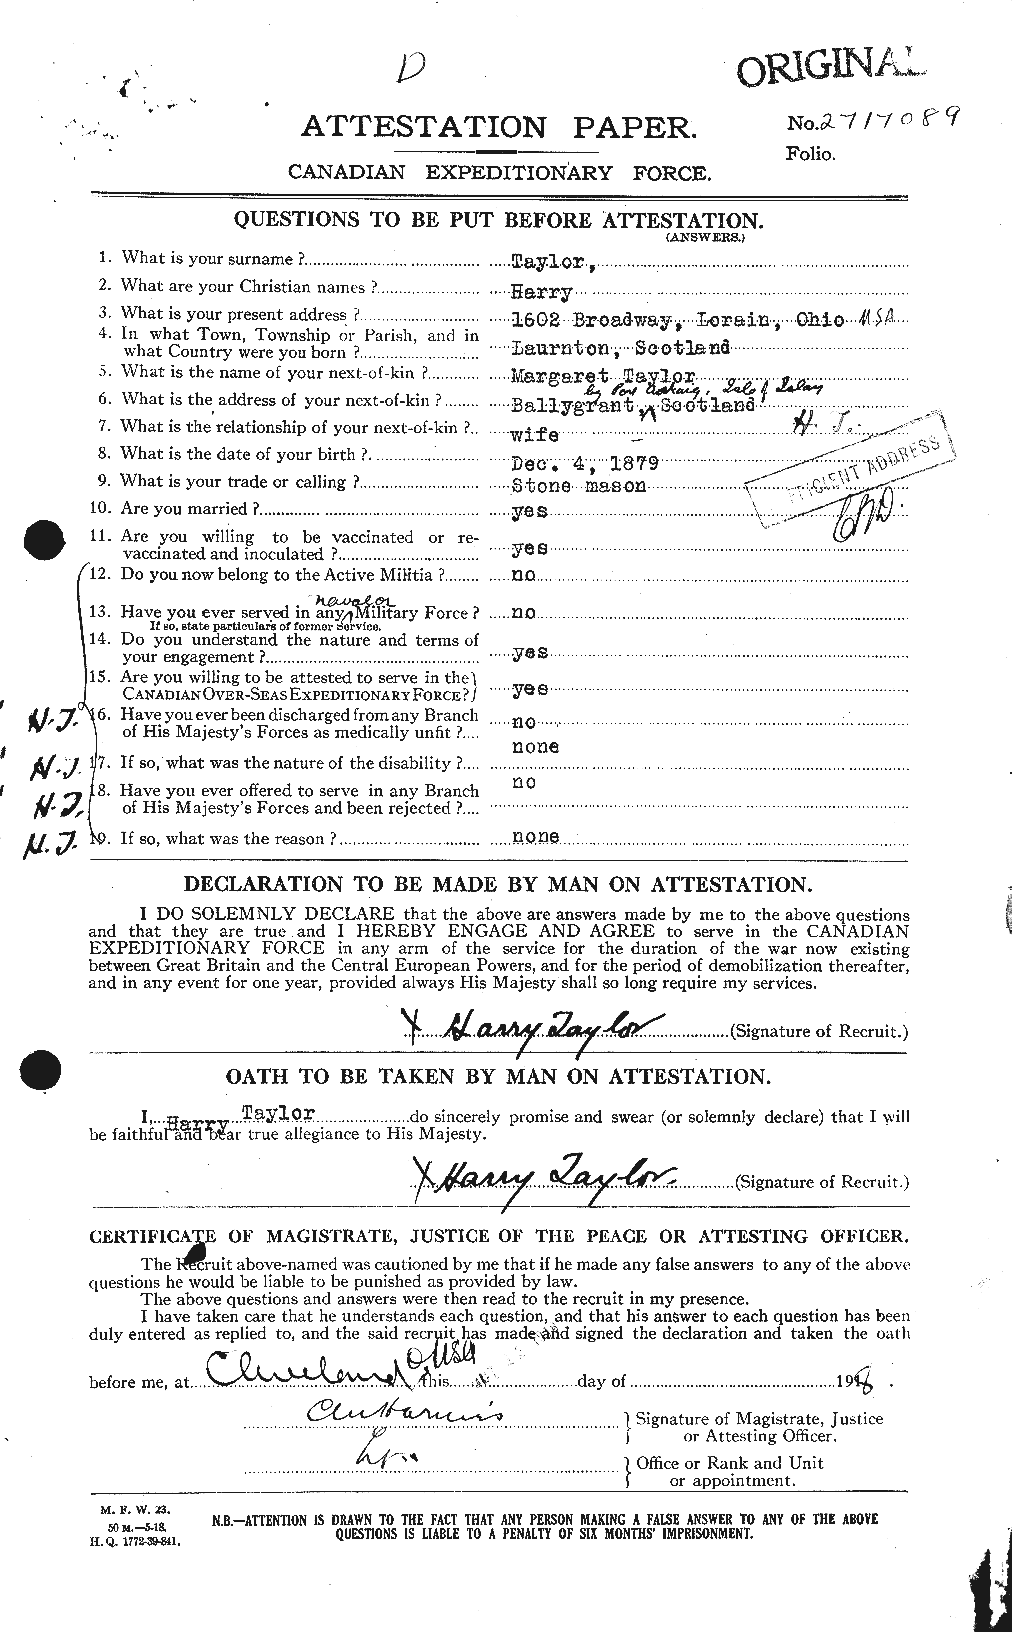 Personnel Records of the First World War - CEF 626454a